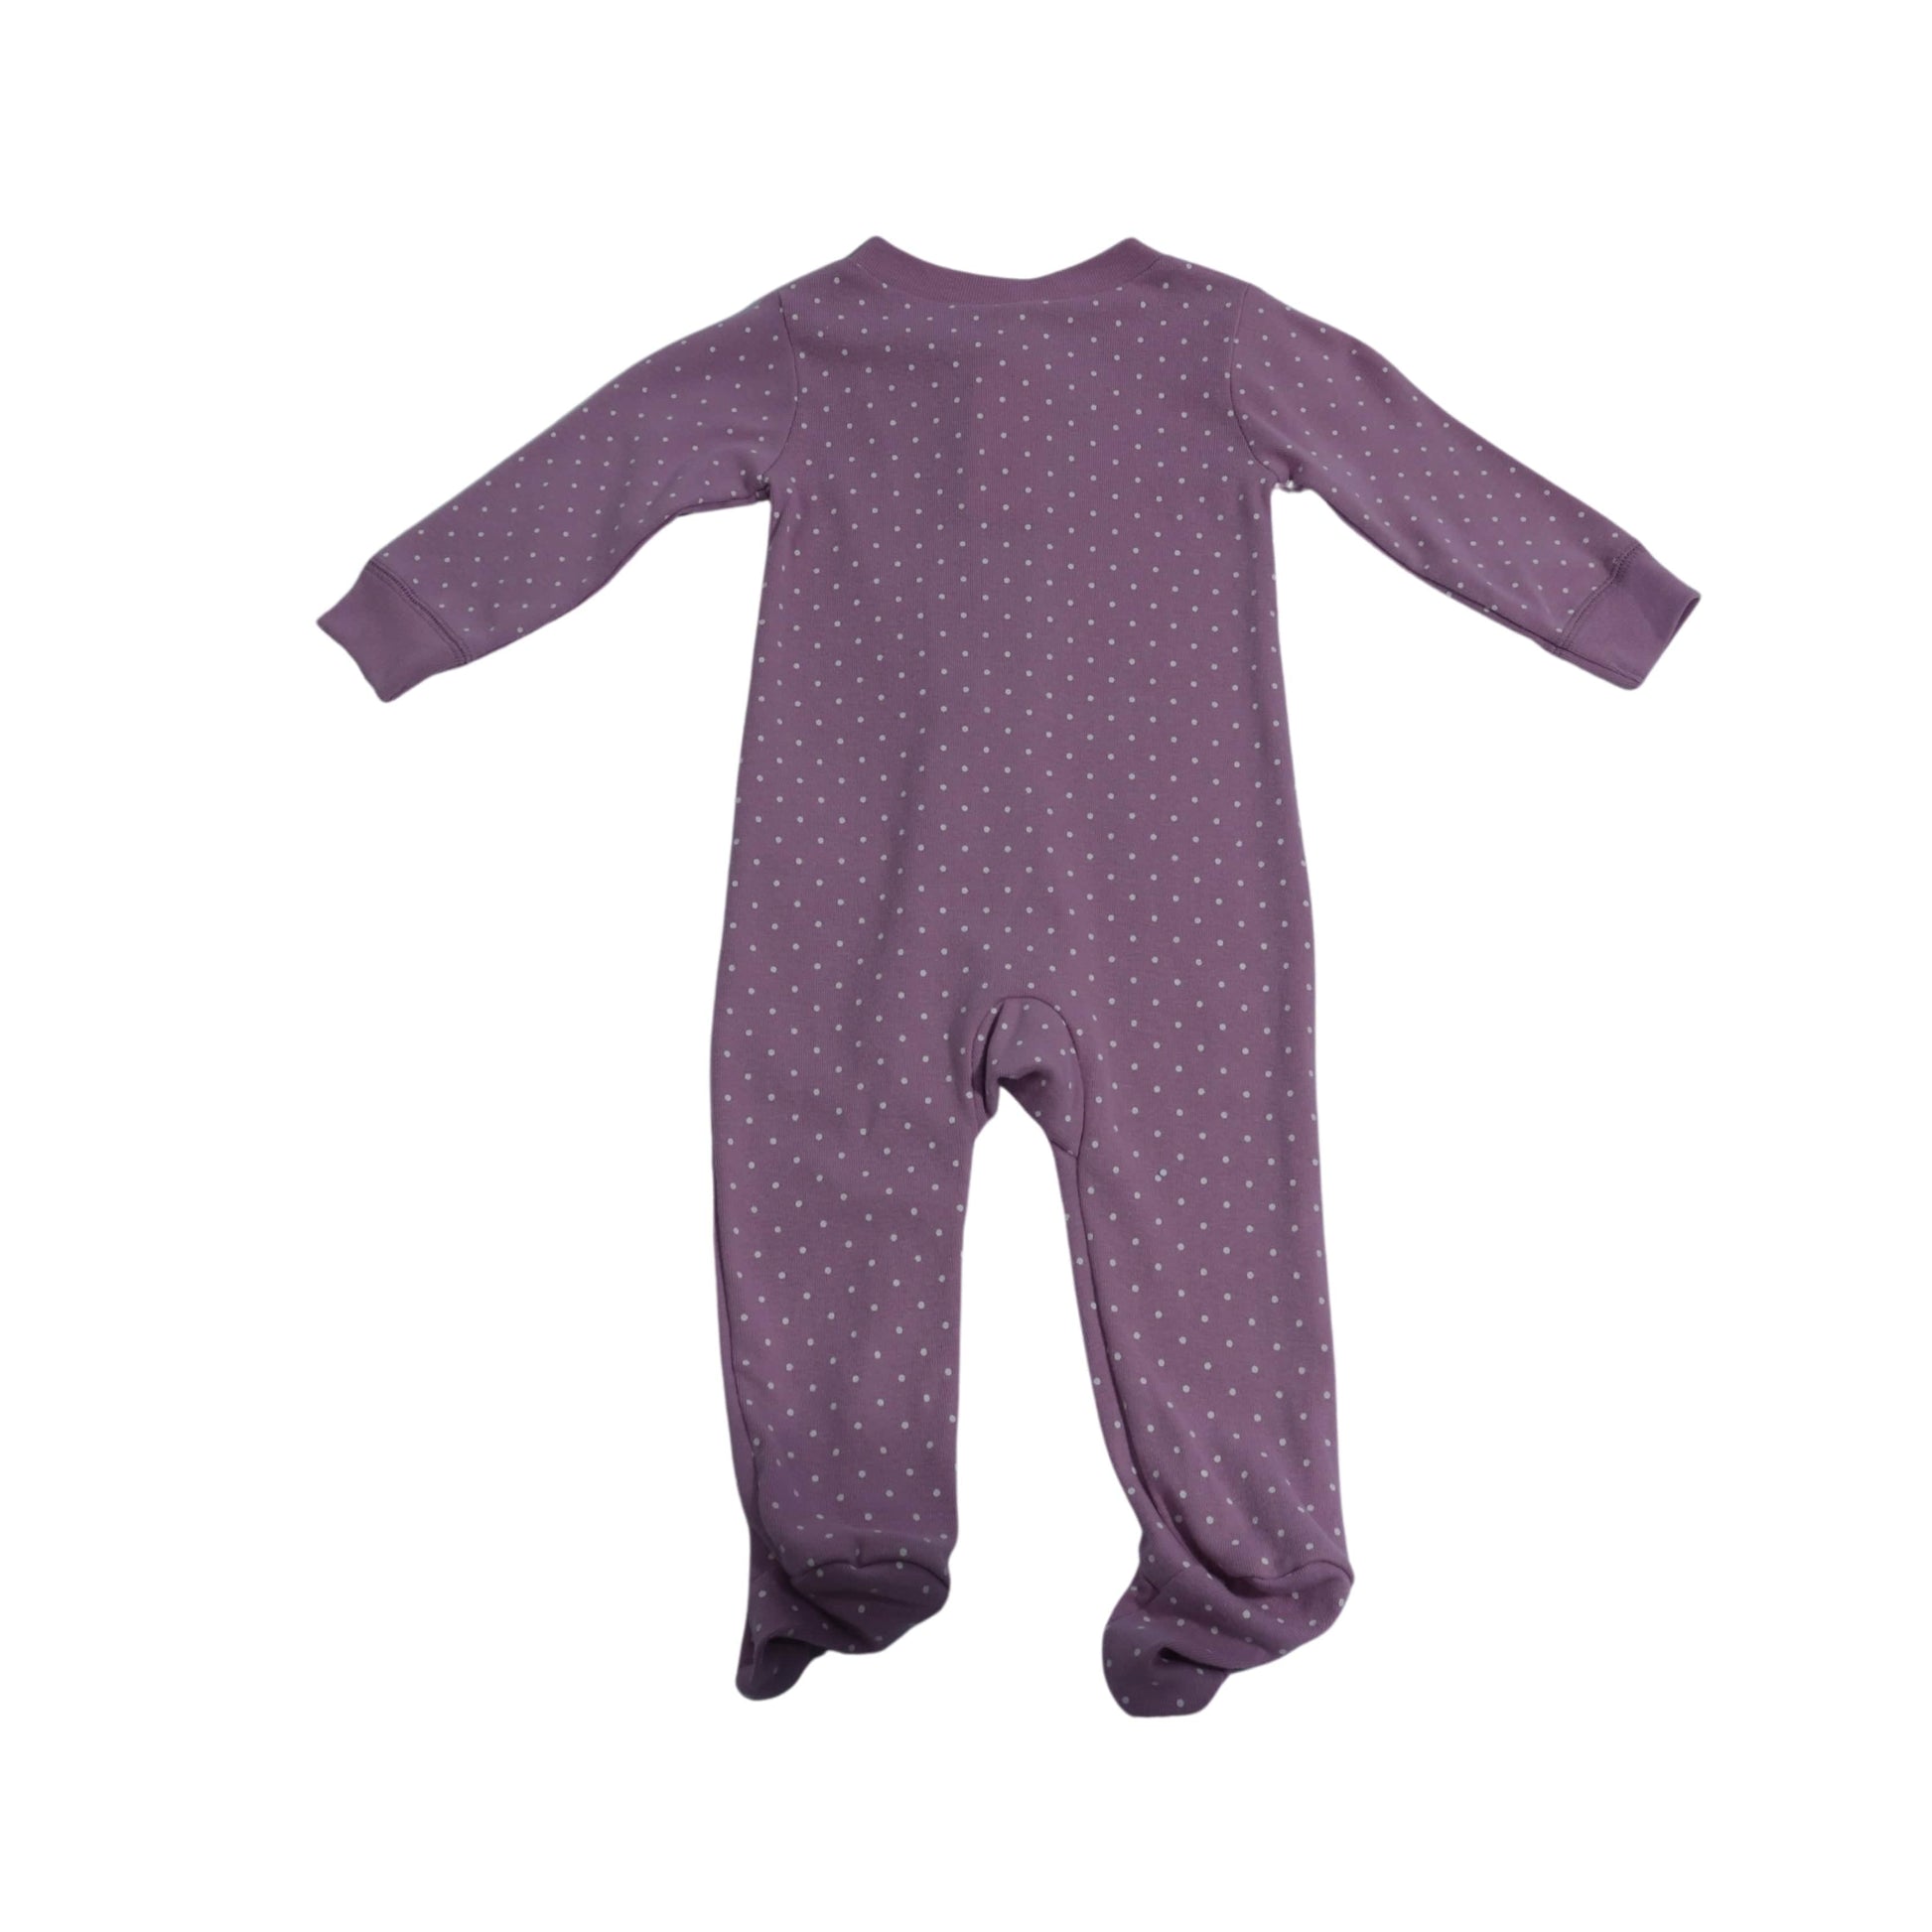 CARTER'S Baby Girl 9 Month / Purple CARTER'S - BABY - Fit Footed Cotton Overall